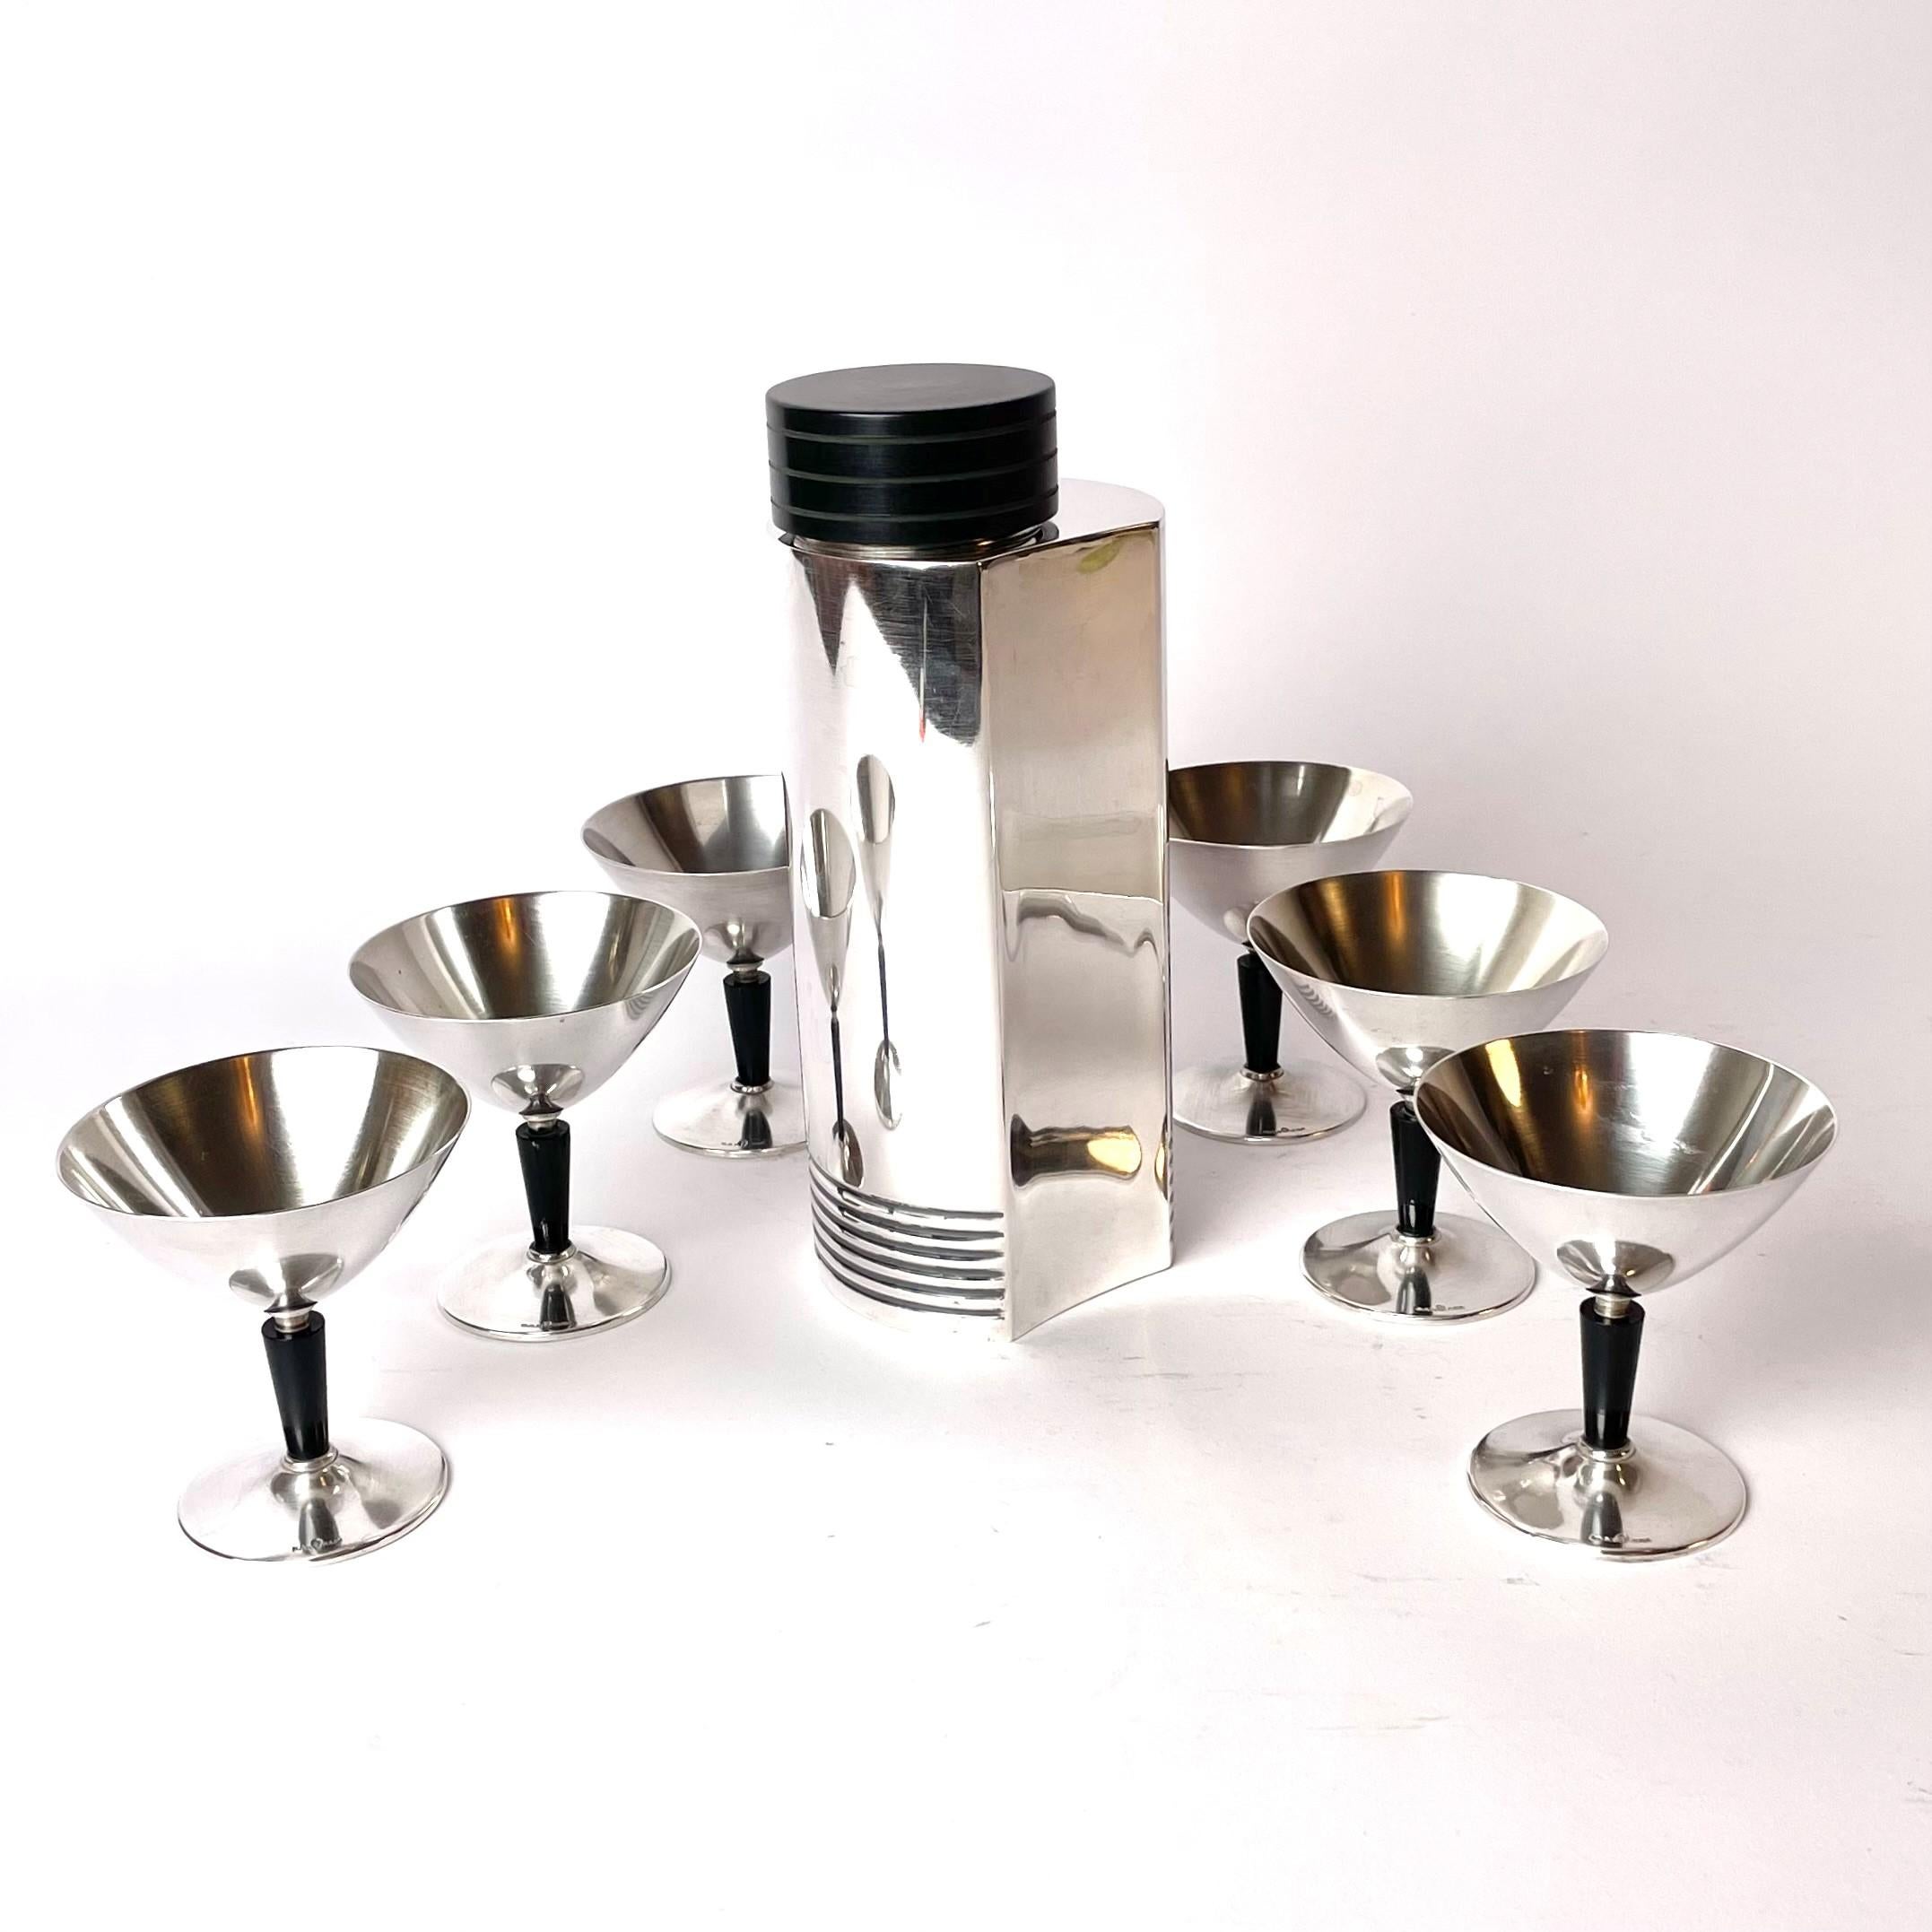 Elegant Art Deco Cocktail Set designed by Folke Arström, Sweden in 1935 for GAB (Guldsmedsaktiebolaget) in Sweden. Made in Silver plate and with Bakelite details. All seven items are marked GAB.

Wear consistent with age and use.